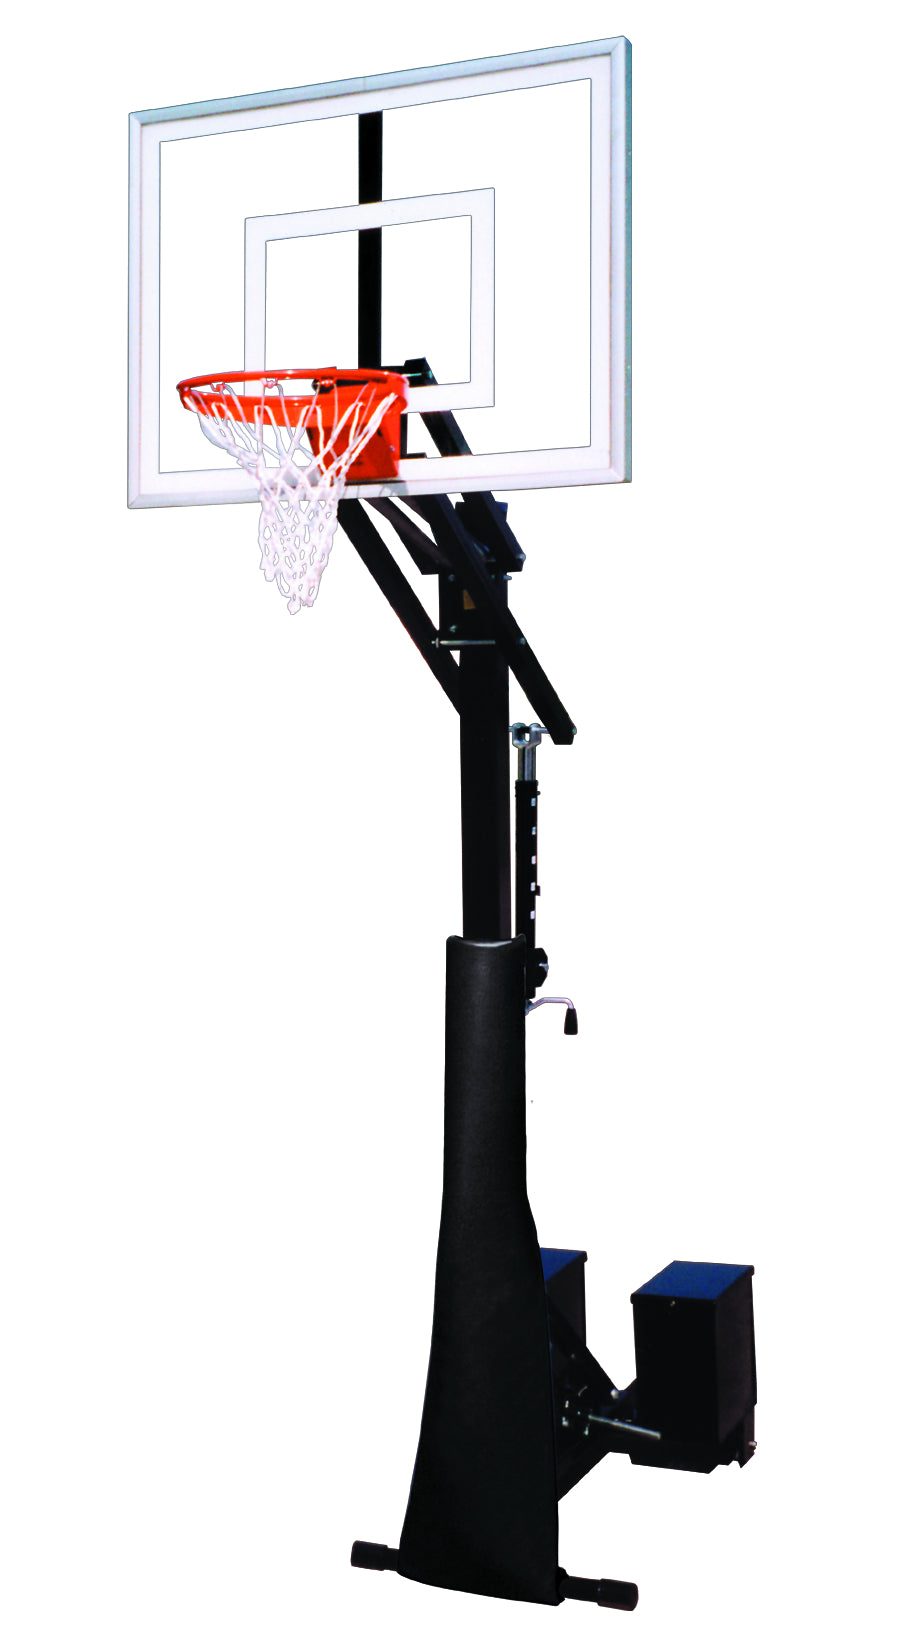 First Team RollaJam Turbo Portable Basketball Goal - 36"x54" Tempered Glass